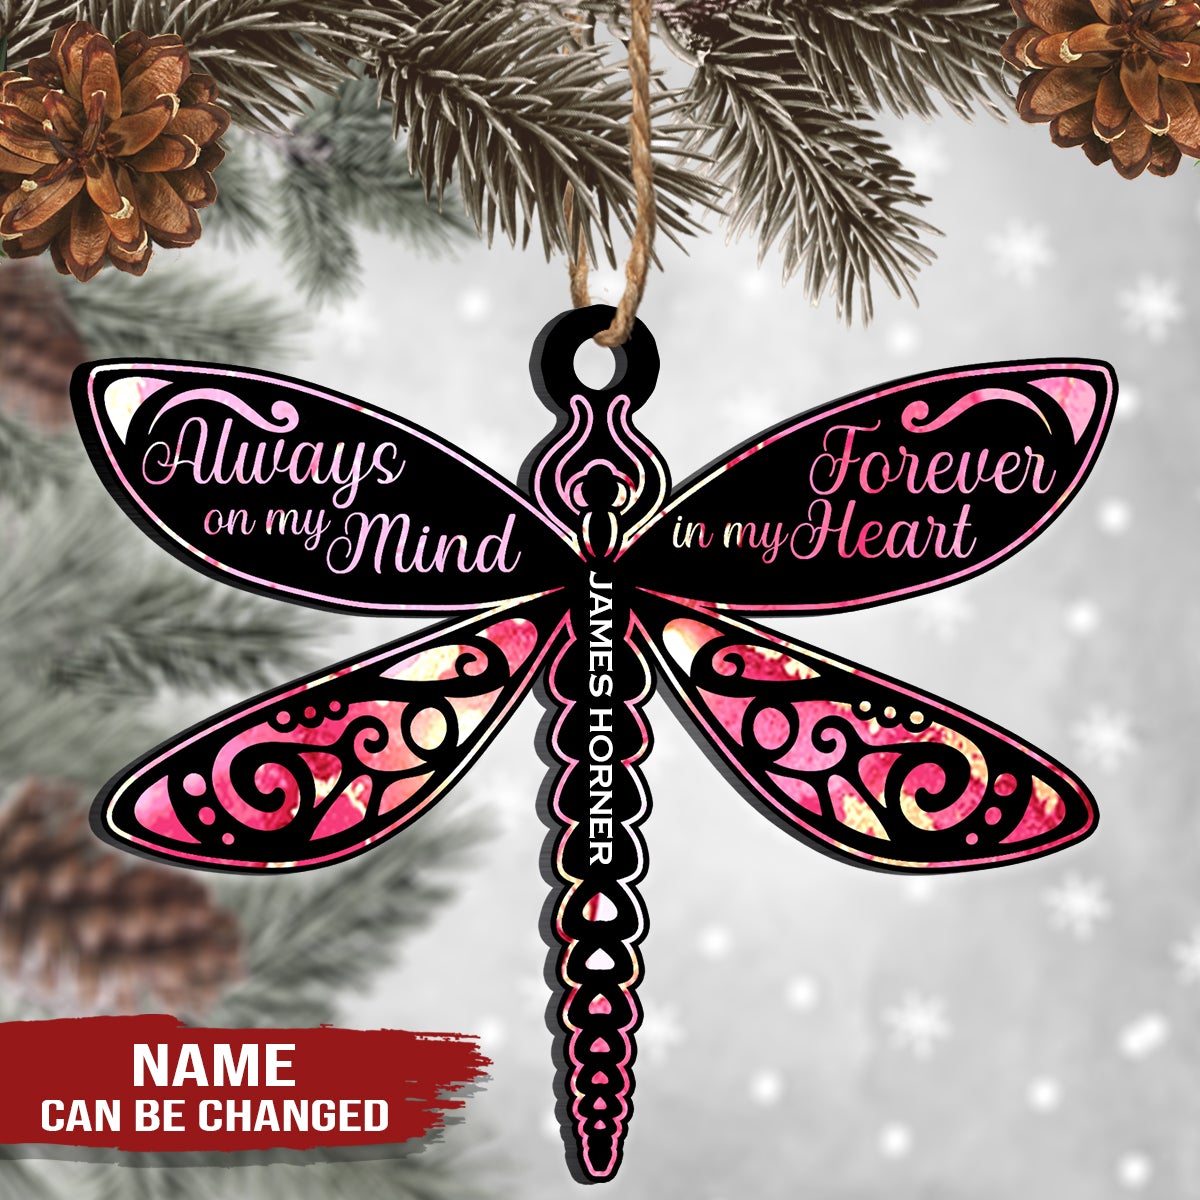 Dragonfly always on my mind forever in my heart Personalized - Two sides Ornament